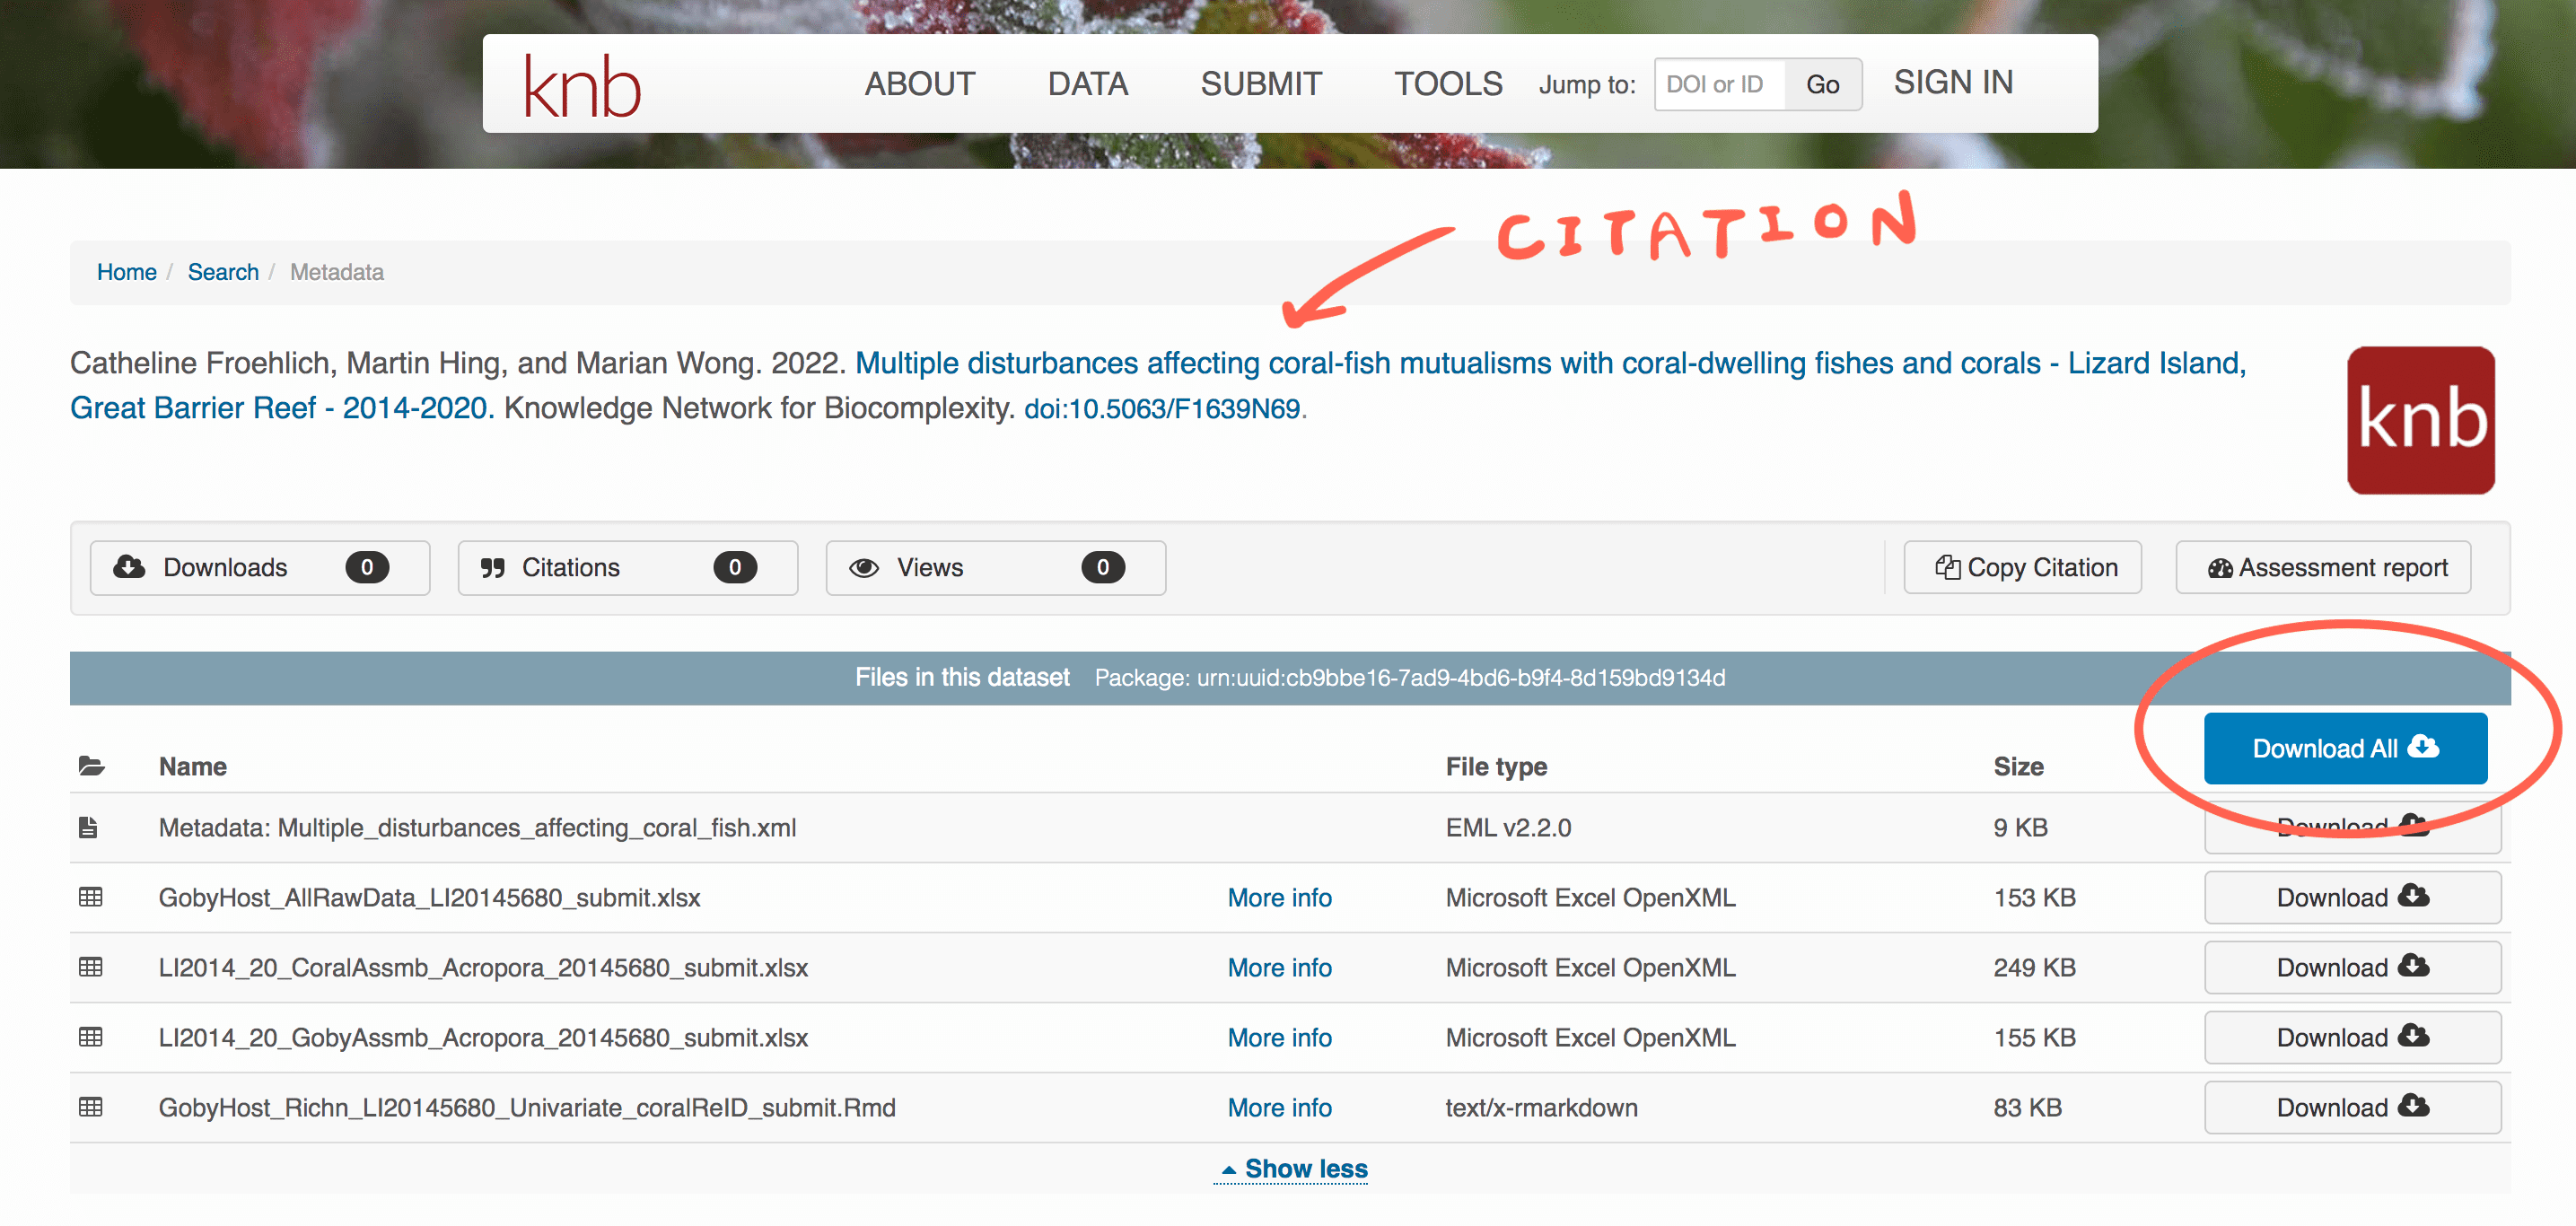 Image showing dataset page. The heading is a citation for the data set. The page includes download links for individual files. You can also click the “download all” button to download all files associated with the data package.